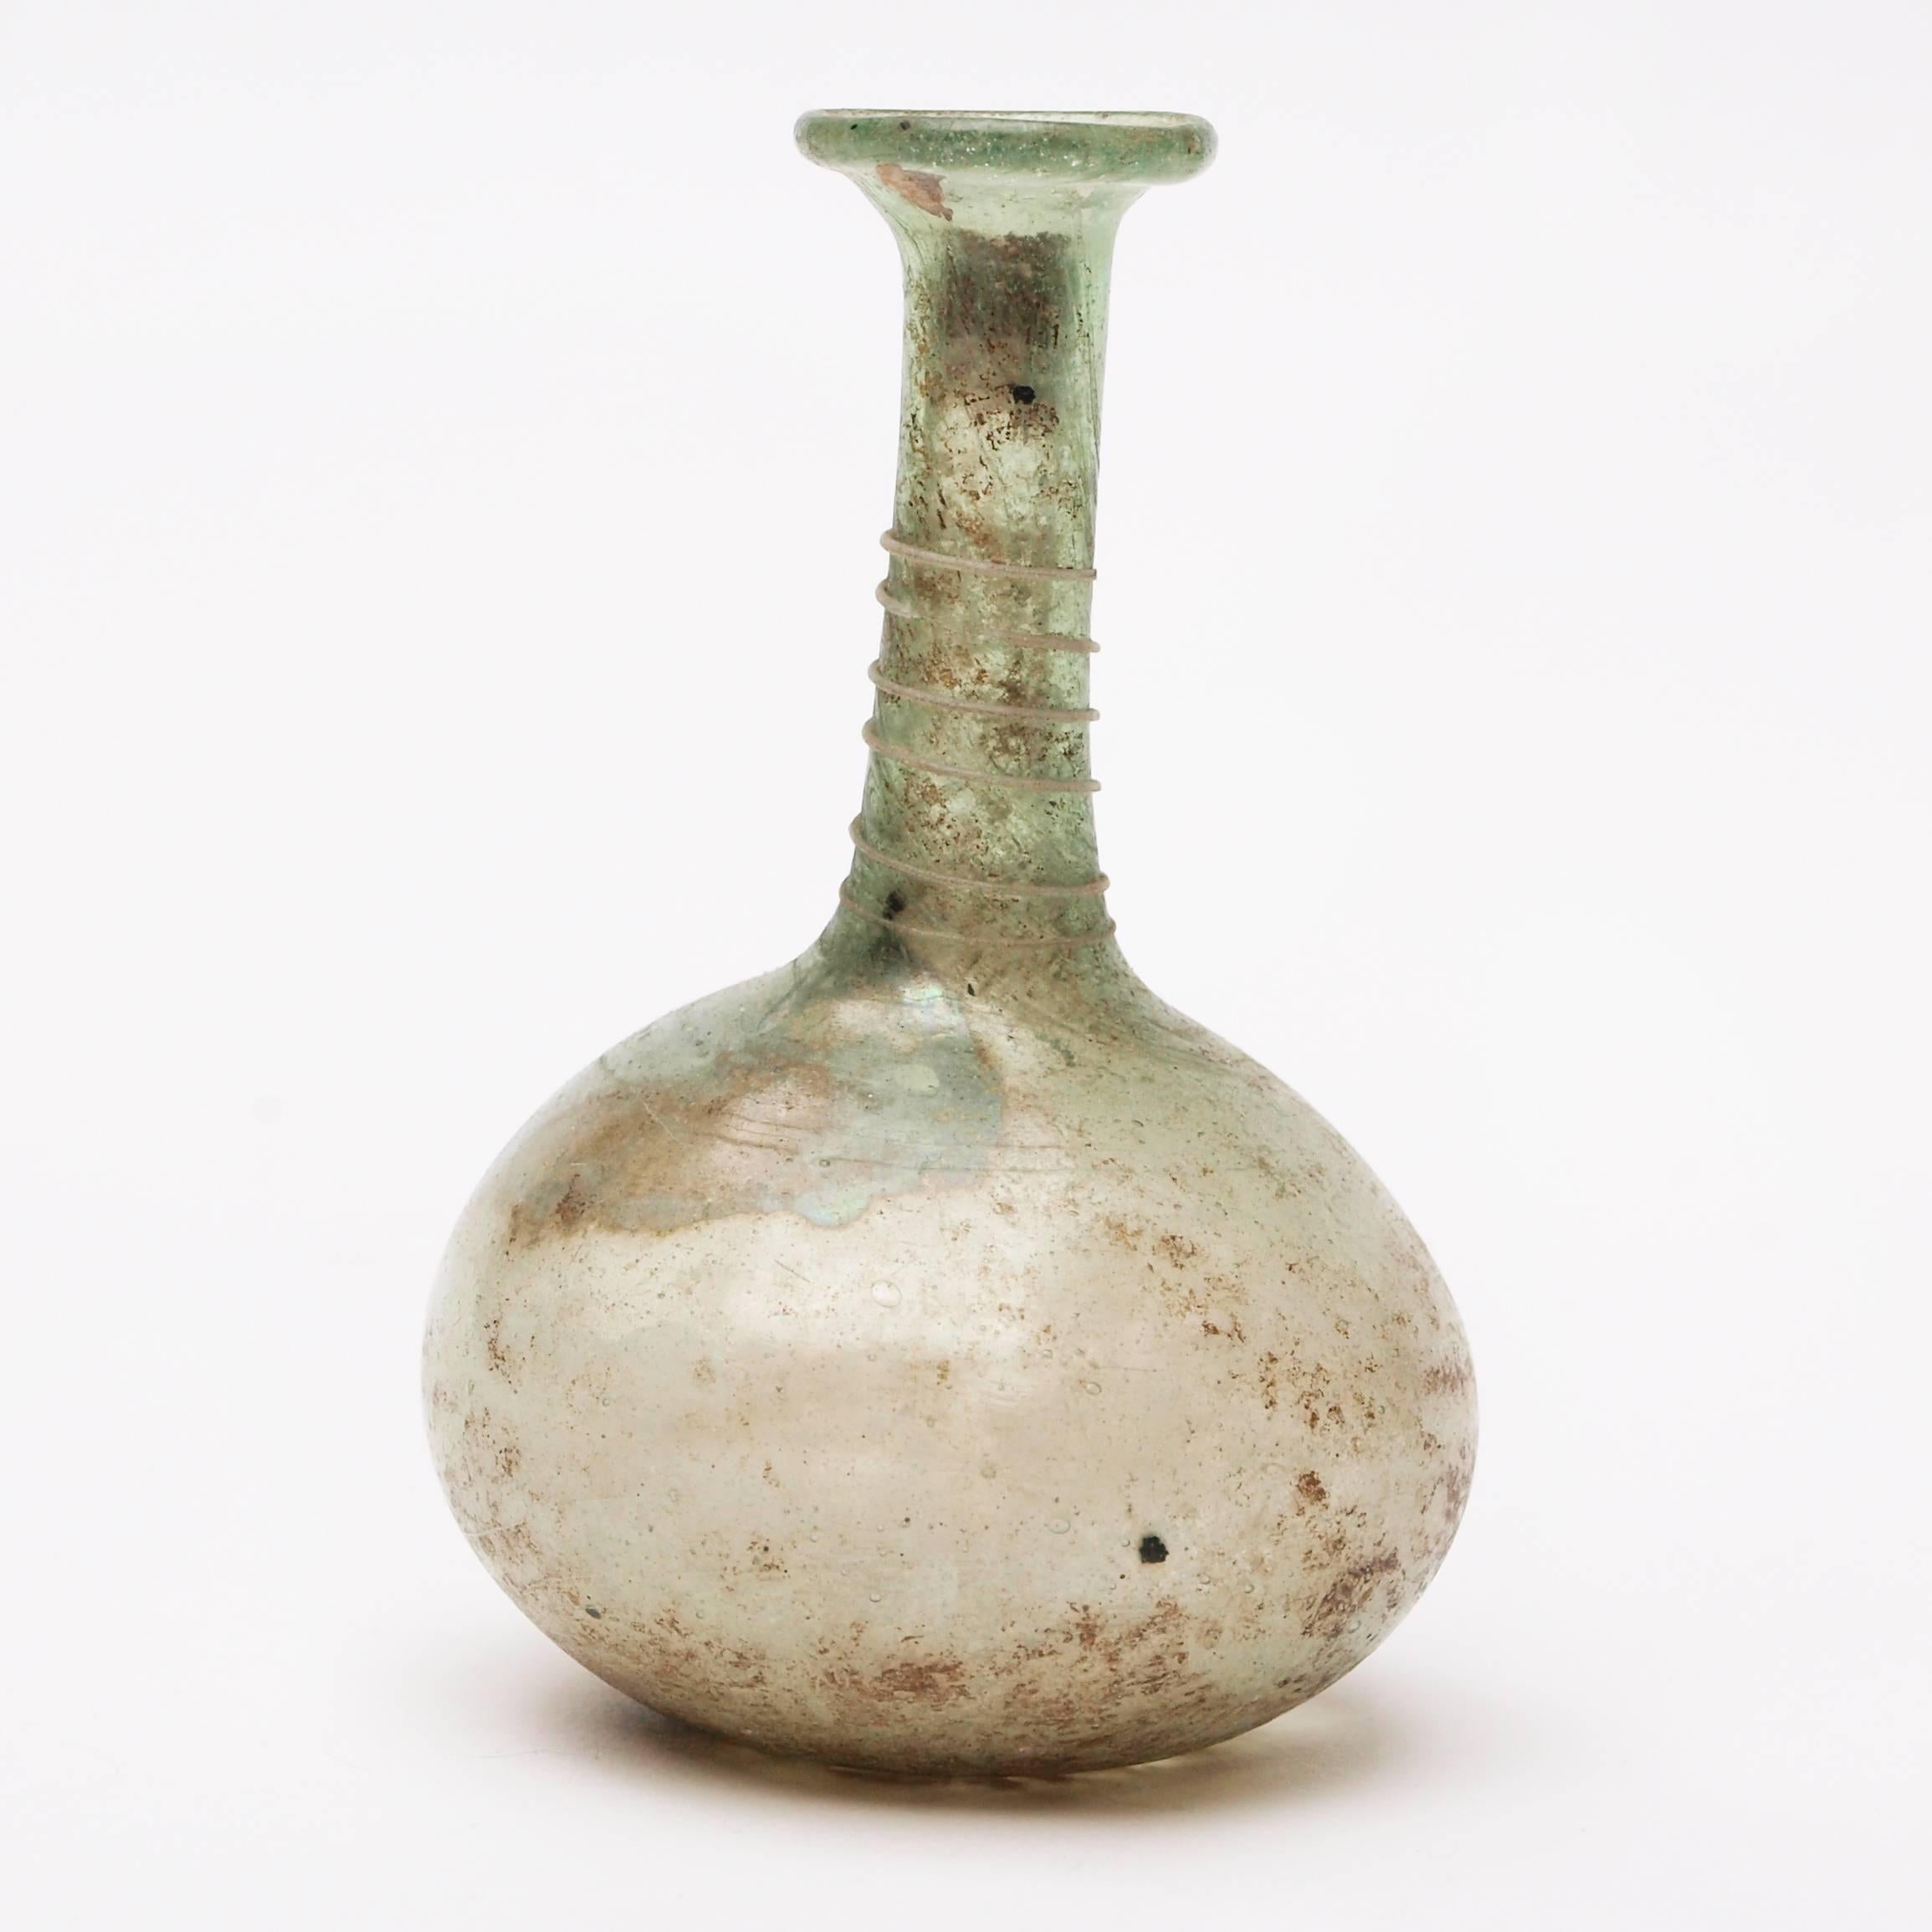 A handblown Roman pale green and white flask dating from the 2nd-3rd century decorated on the neck with a spiralled thread.